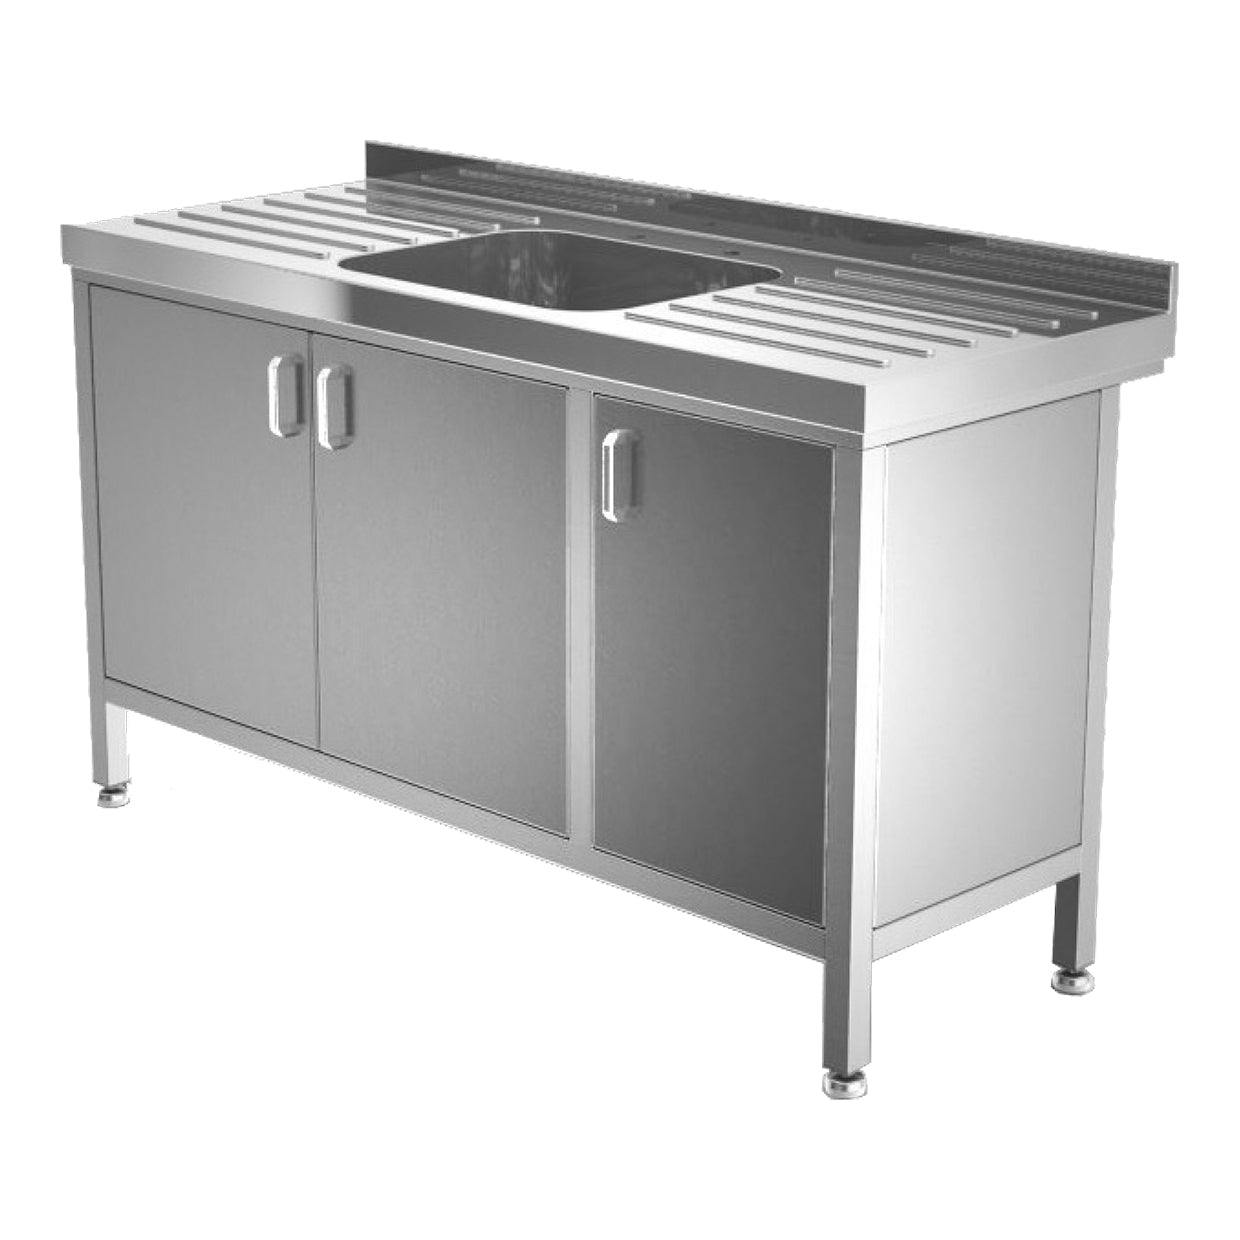 Stainless steel single bowl sink with cupboard